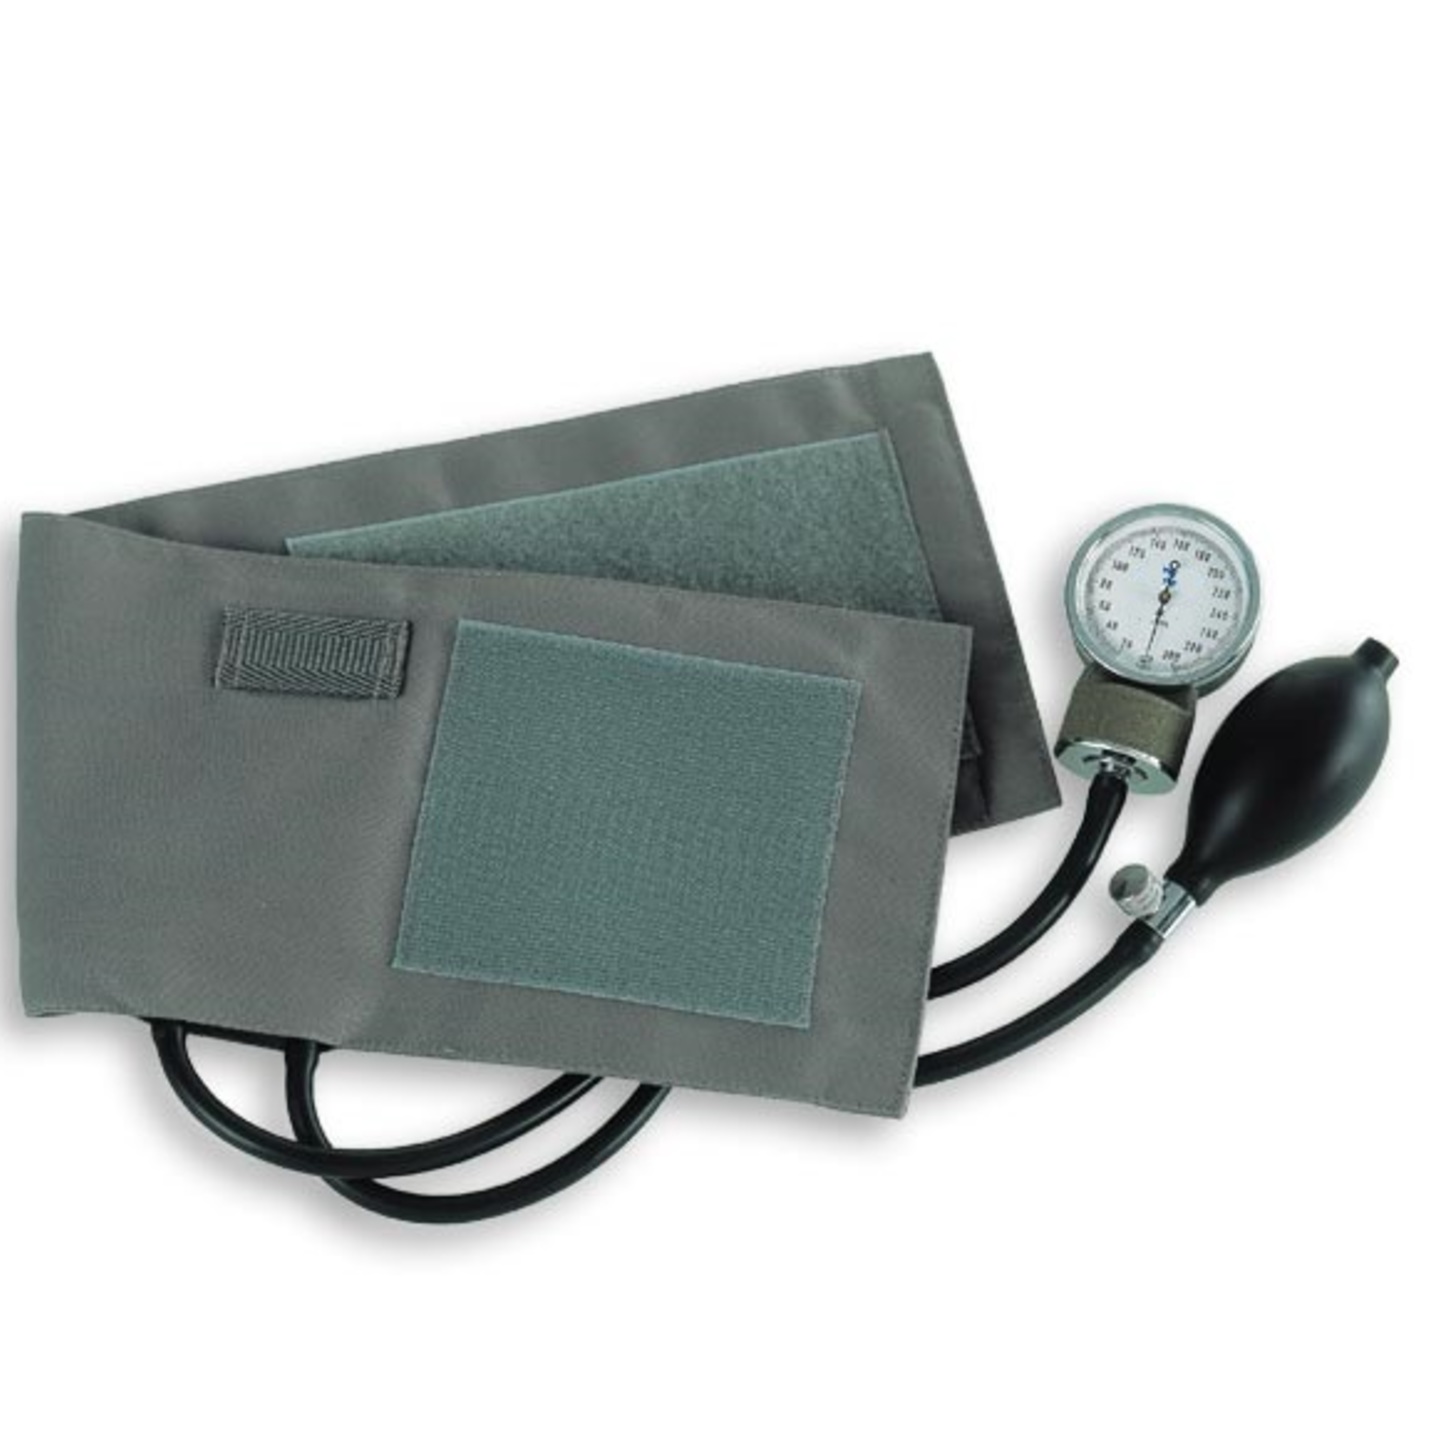 Aneroid Blood Pressure Monitor Dial Type - Manual